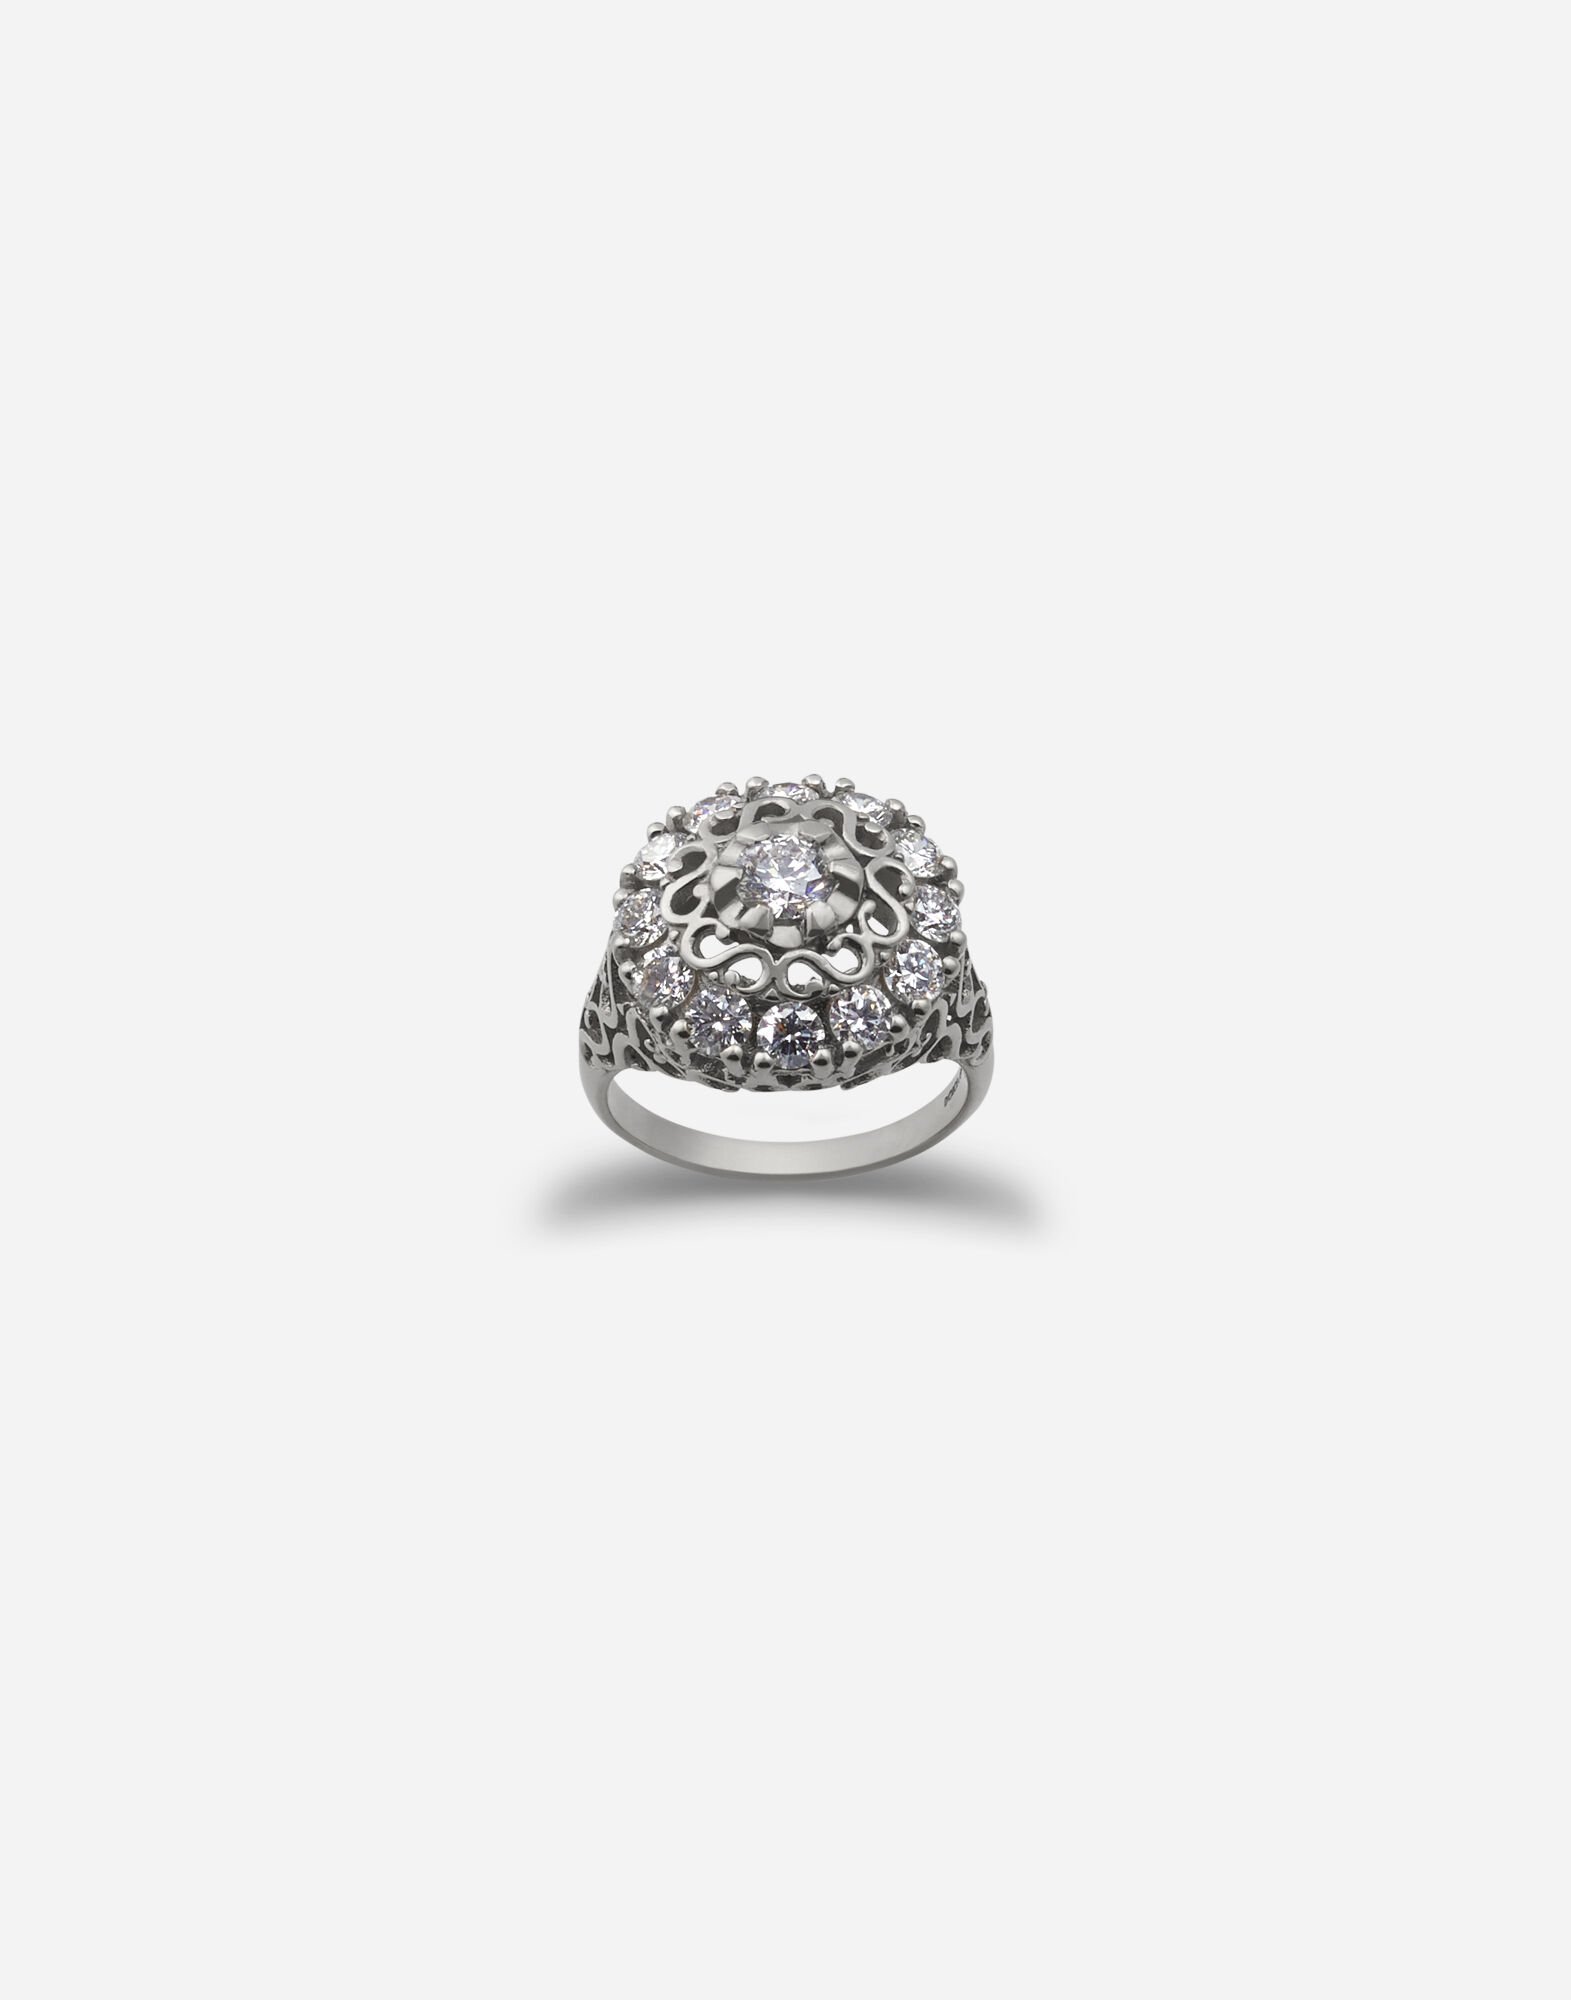 Dolce & Gabbana Sicily ring in white gold with diamonds Gold WEJP1GWROD1